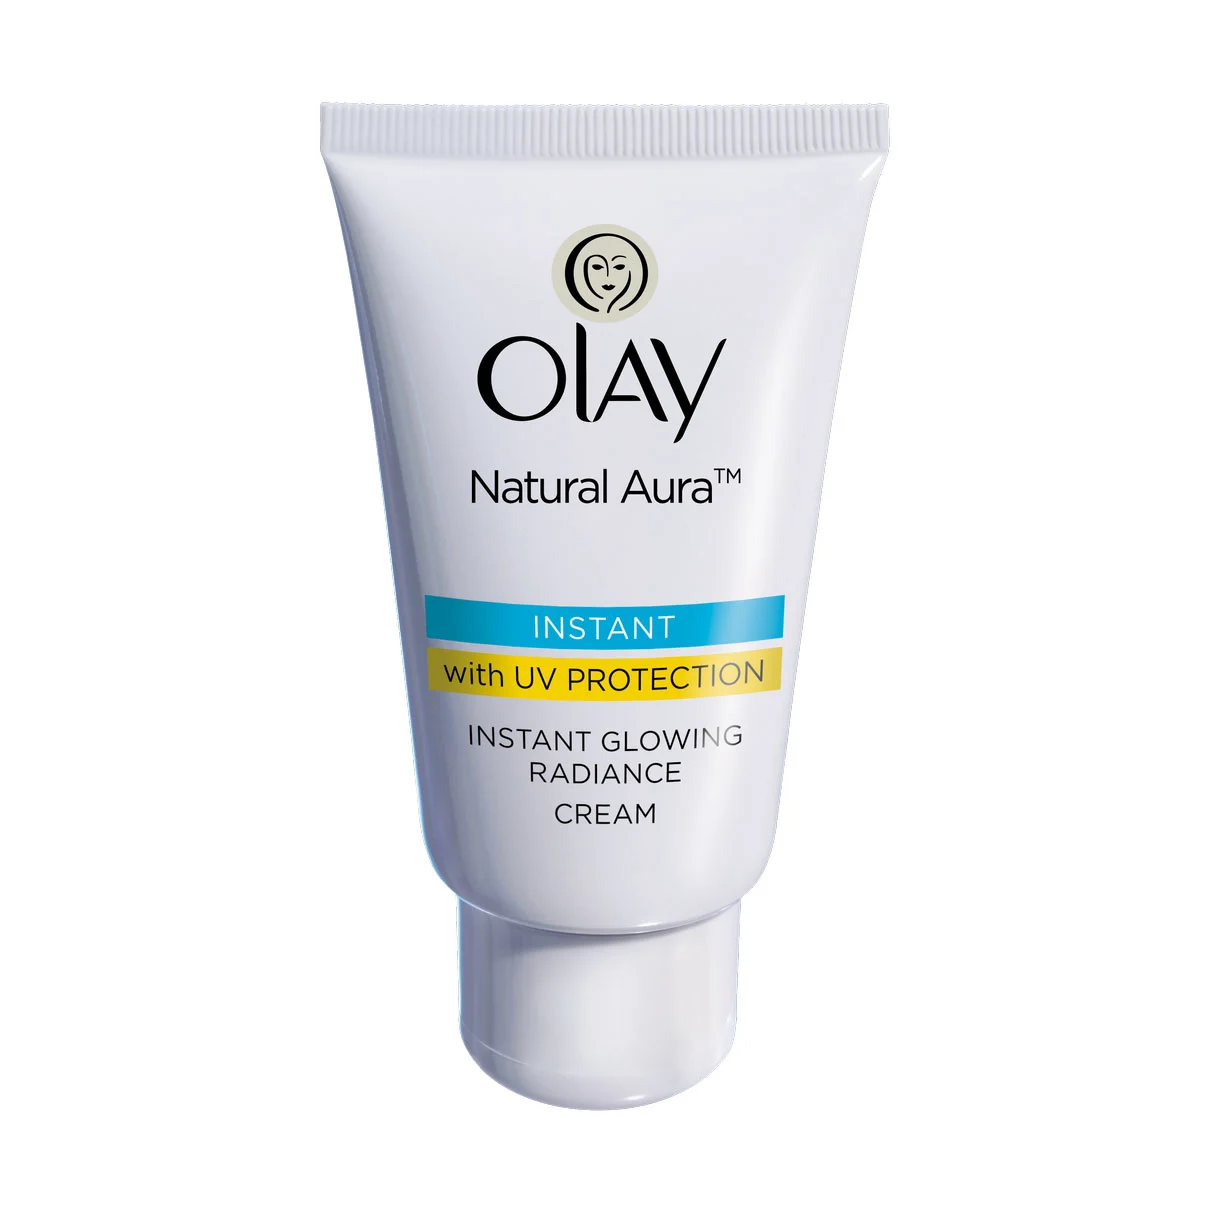 Olay Natural Aura 7 IN ONE Instant Glowing Radiance with UV Prote...